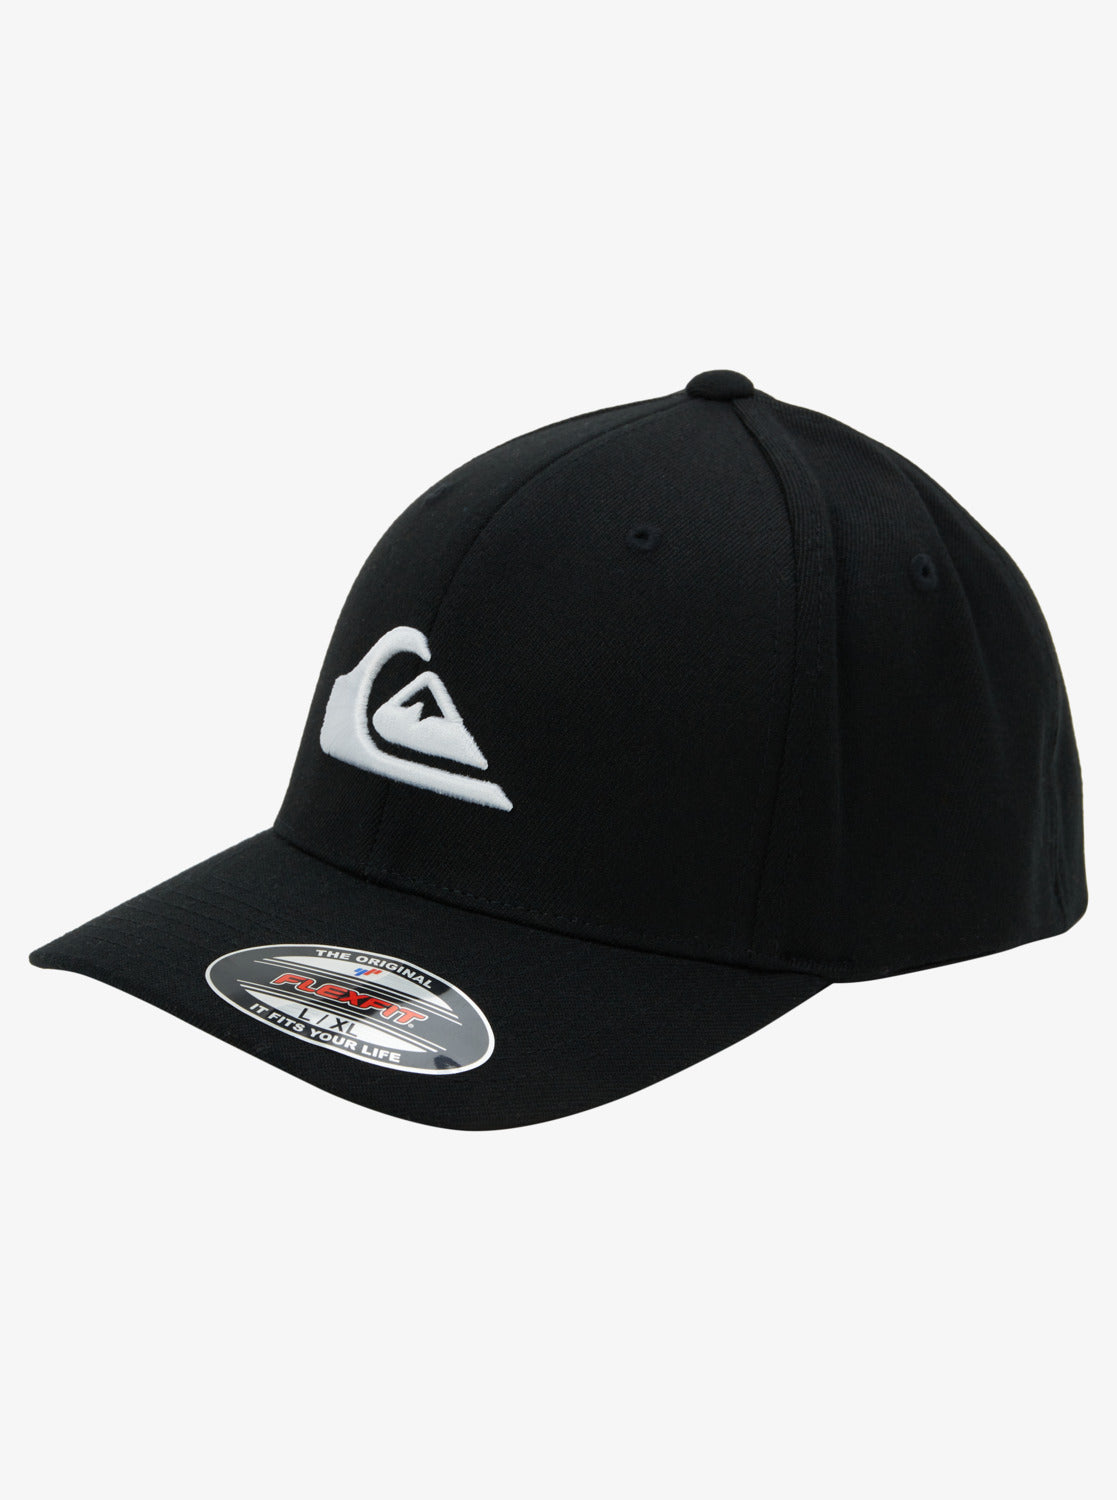 Quiksilver Mountain and Wave Cap black white